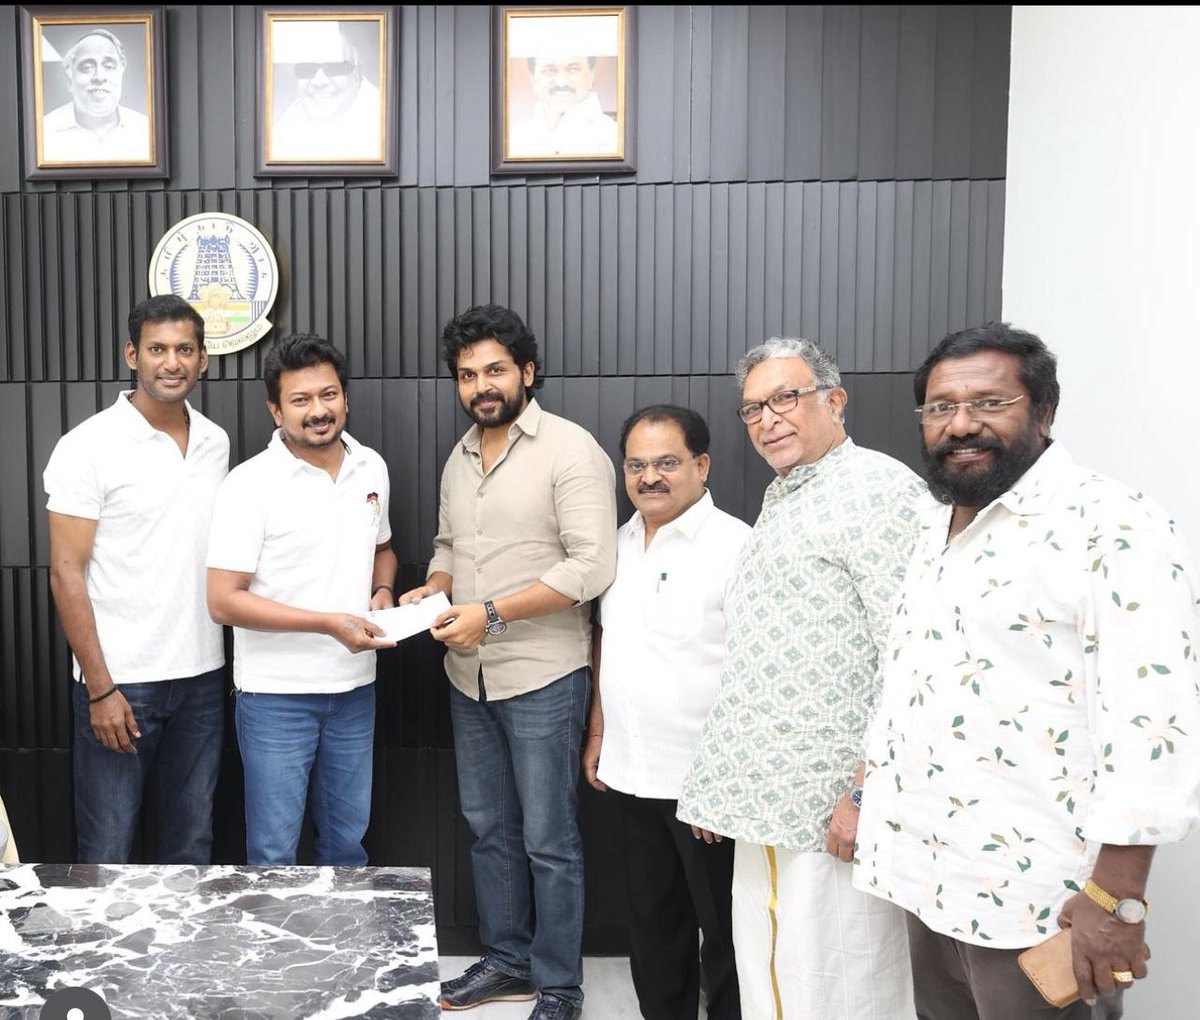 Thank you Honerable Minister @Udhaystalin for your generous contribution of 1 crore to the Nadigar Sangam building fund! Your support is a testament to your commitment to the arts and culture.** Congratulations to team Nadigar Sangam #NadigarSangam #UdhayanidhiStalin